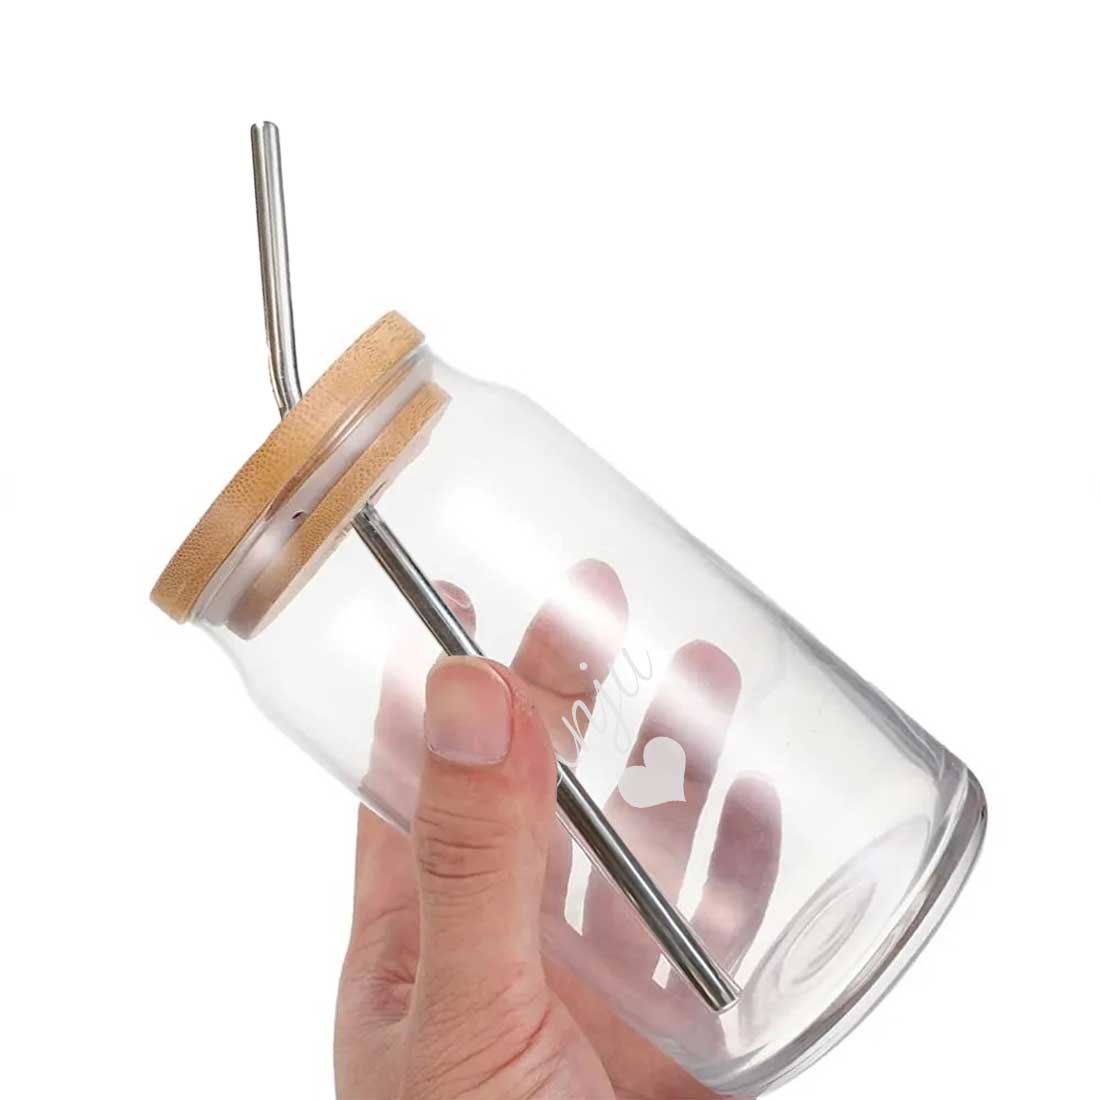 Personalized Glass Bottle with Straw (Metal) and Wooden Lid